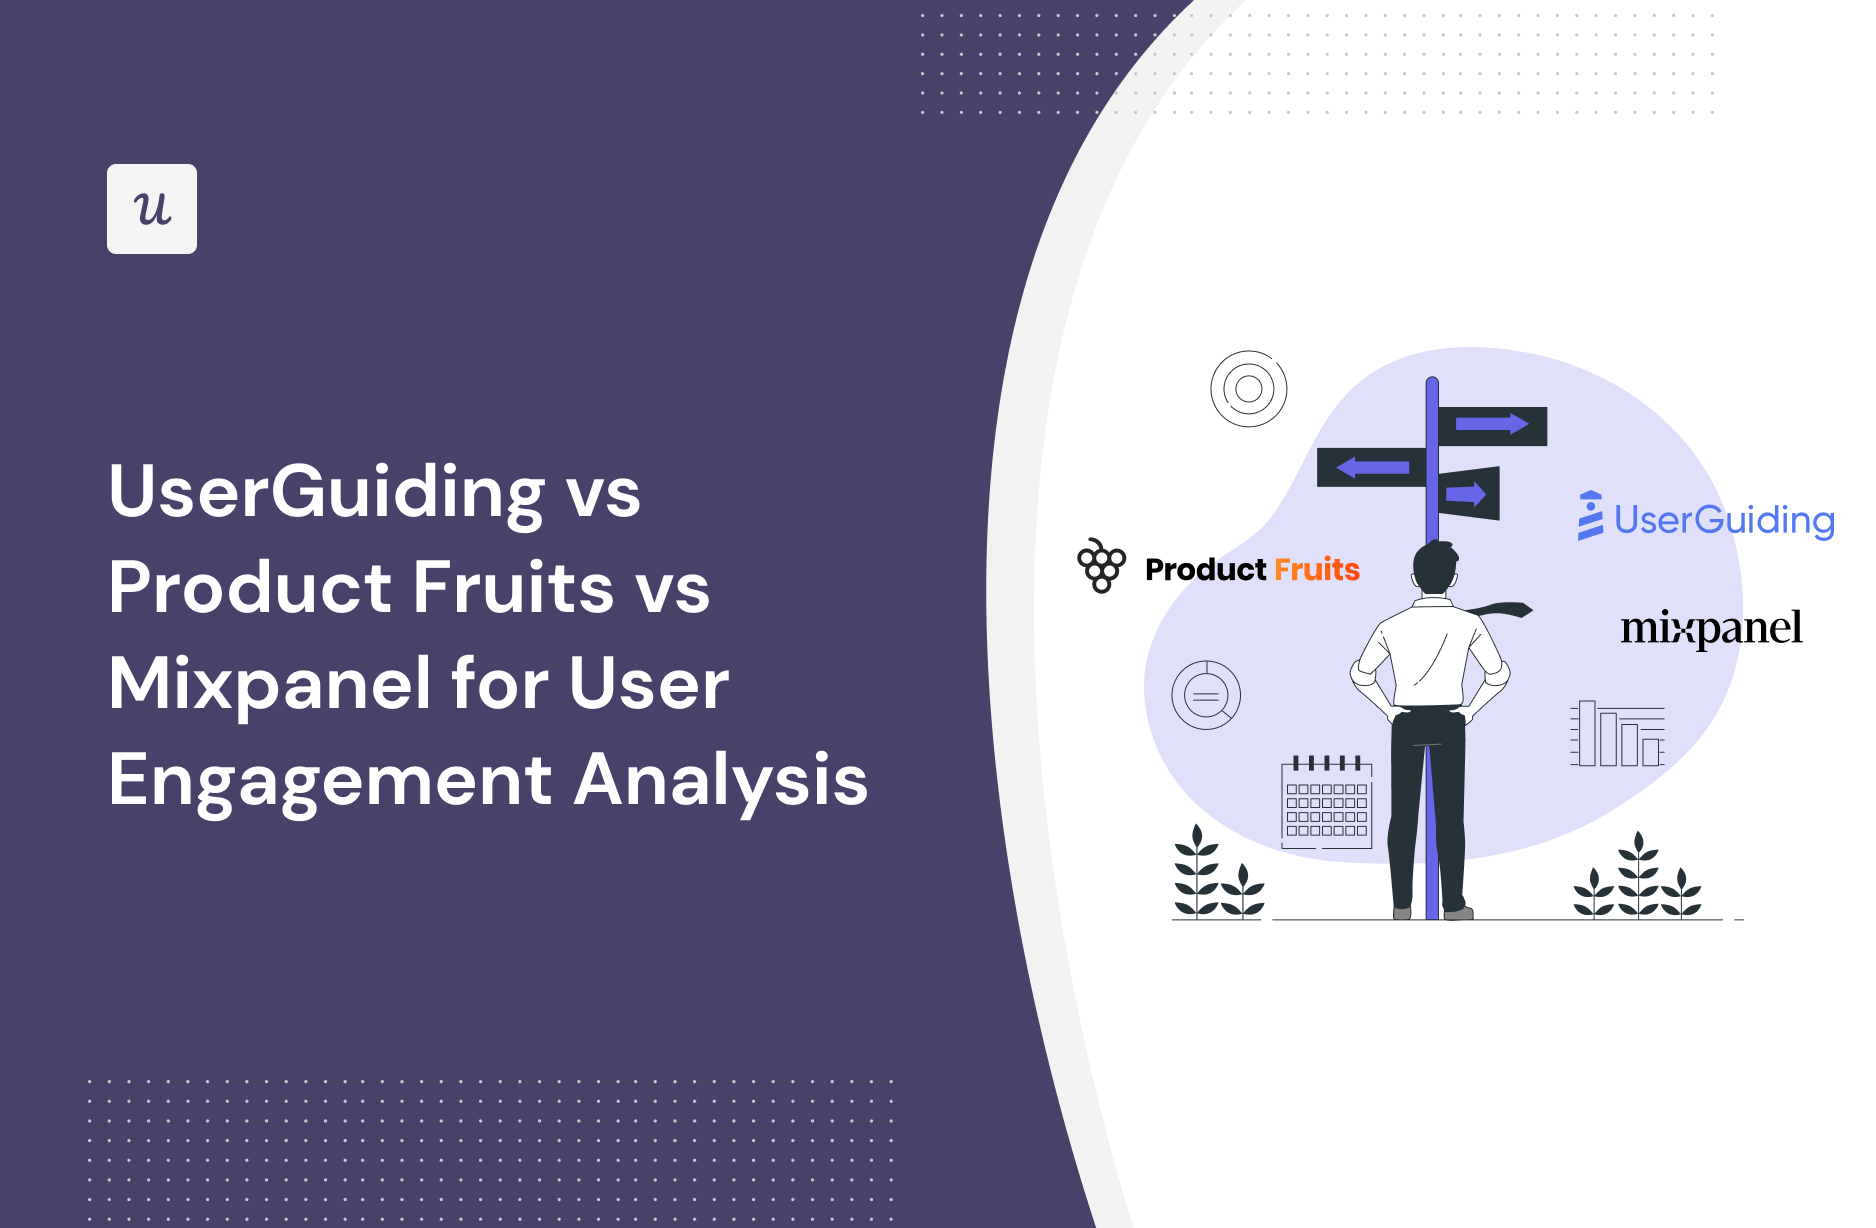 UserGuiding vs Product Fruits vs Mixpanel for User engagement analysis